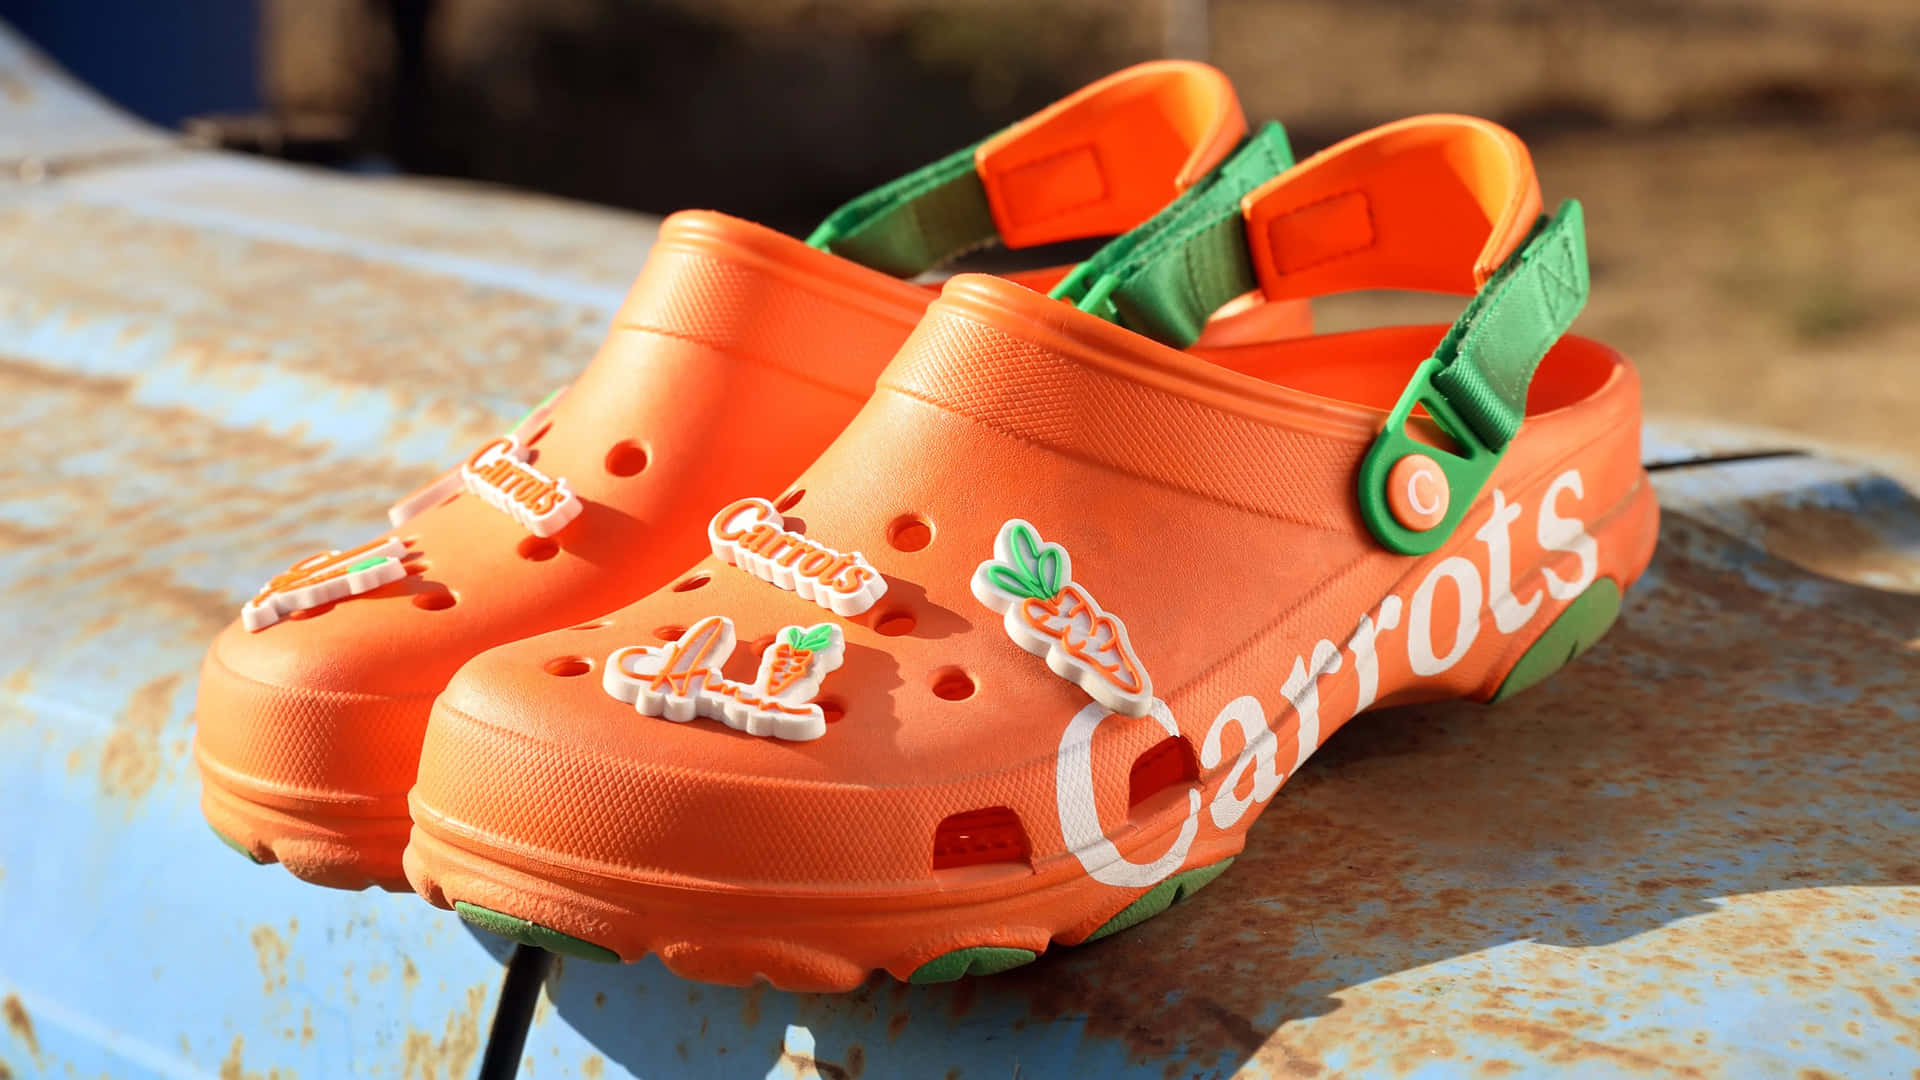 A Pair Of Orange Clogs With The Words Carrots On Them